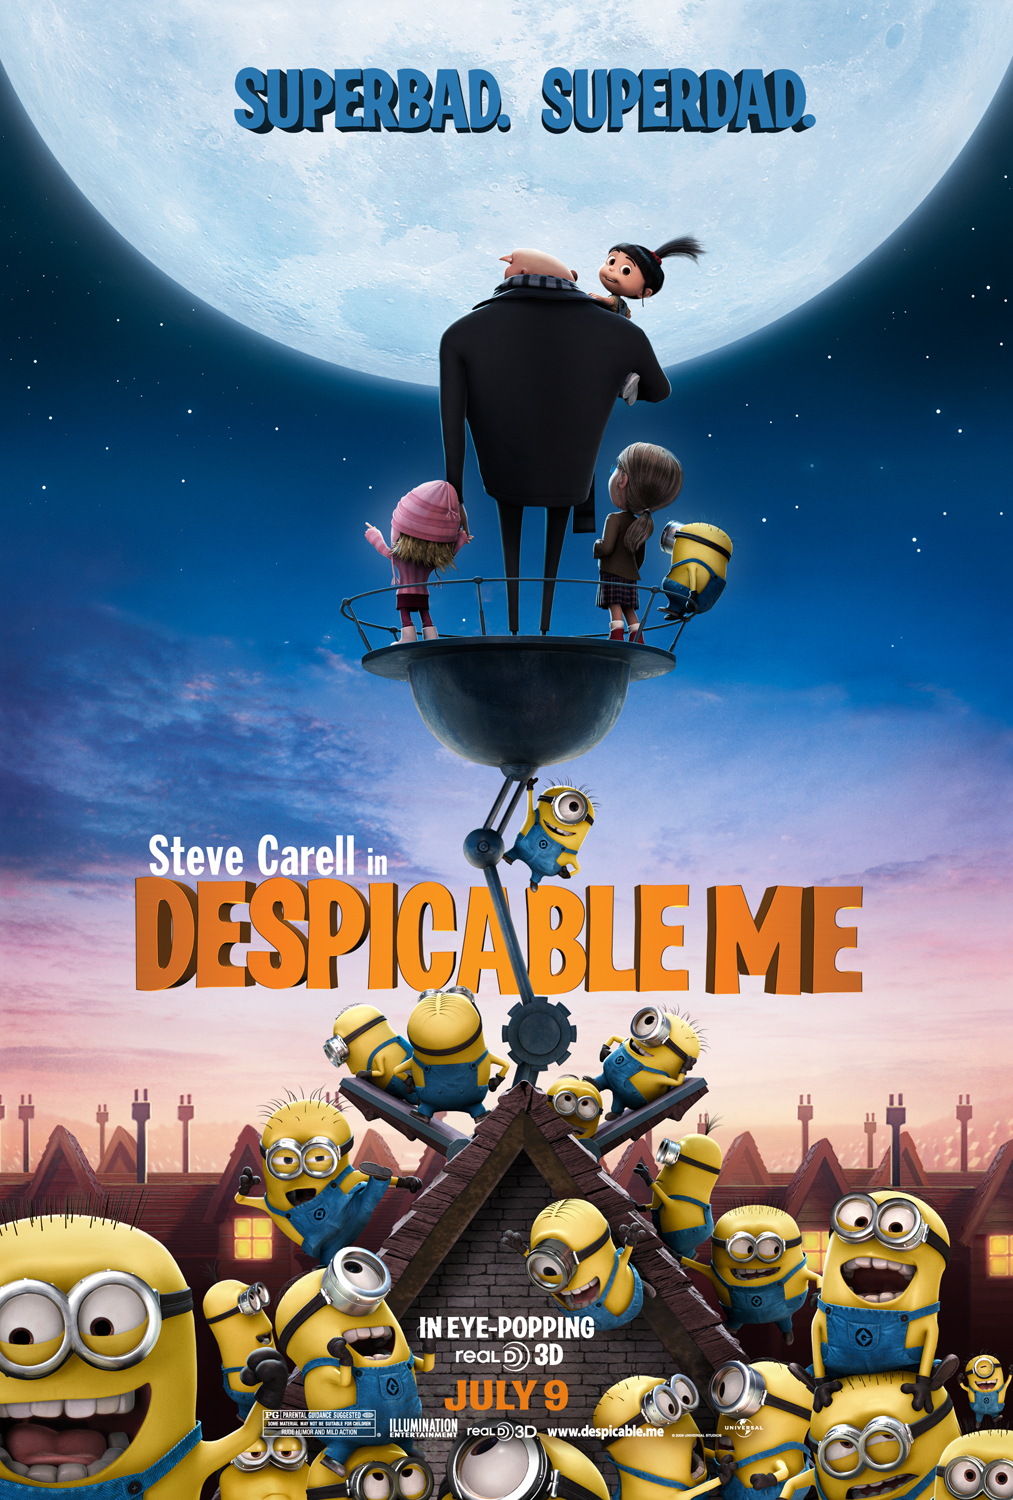 Best Christmas animated movies - Despicable Me